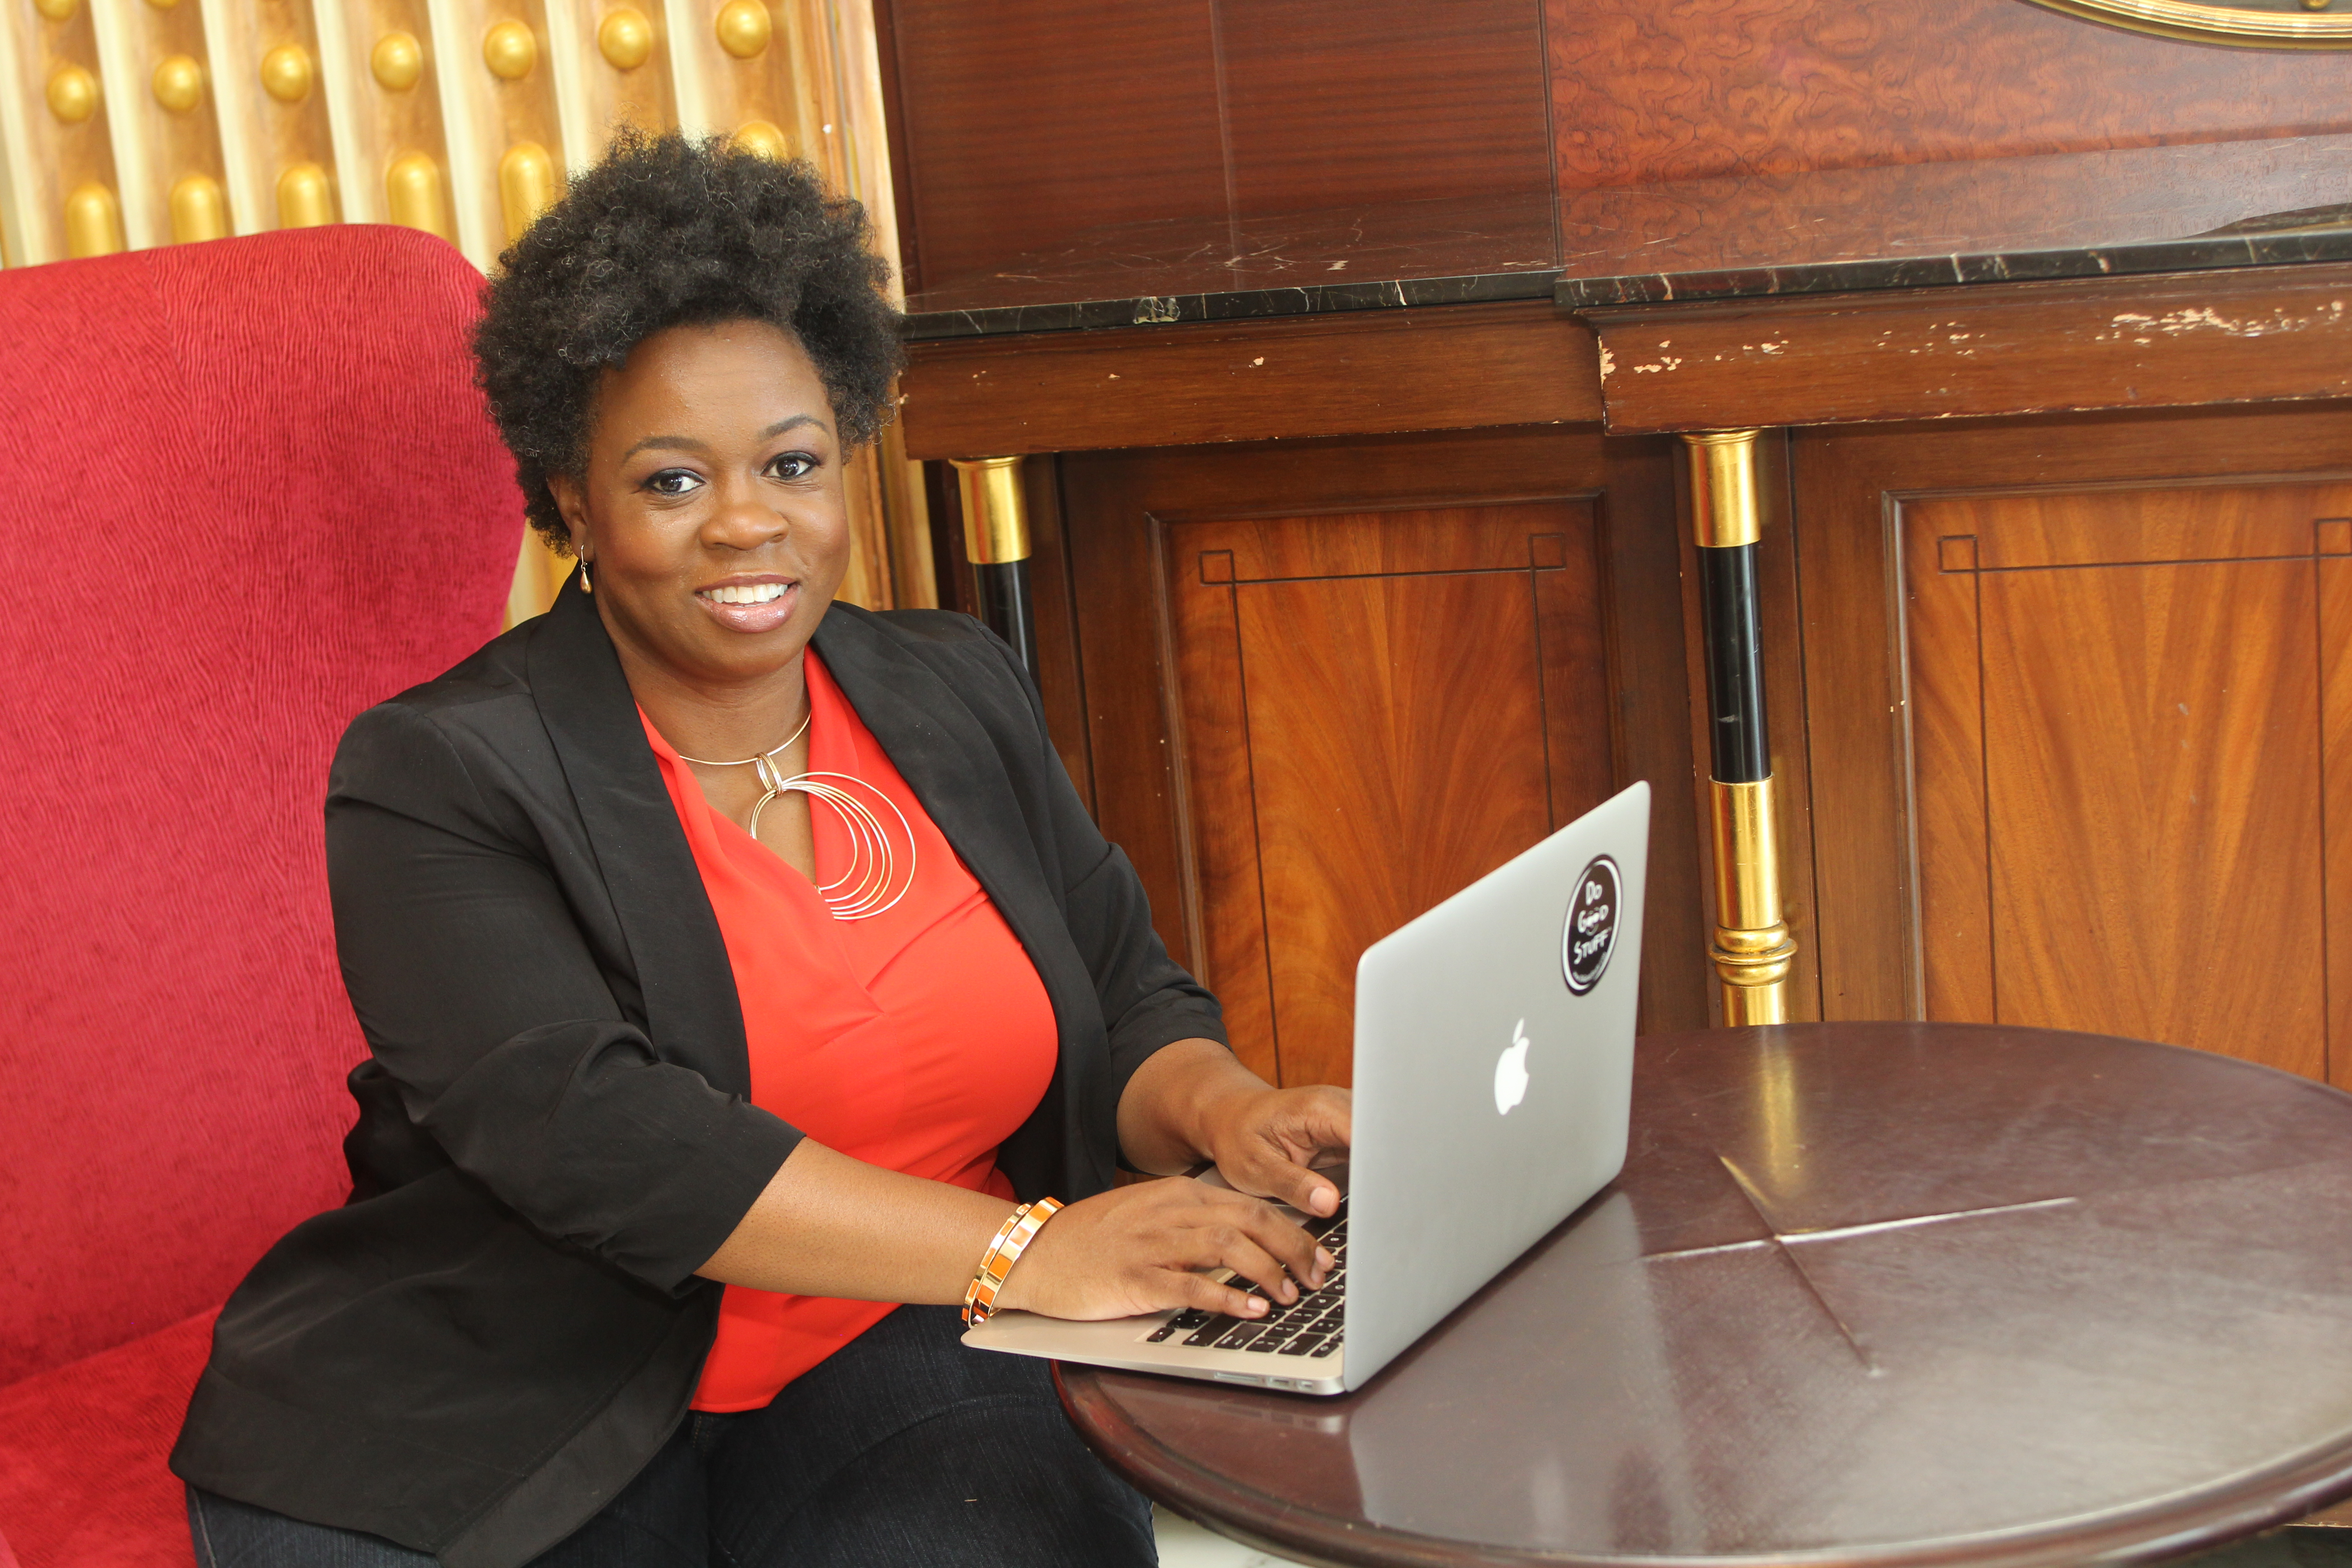 Michele Heyward, Founder PositiveHire sitting in front of a laptop